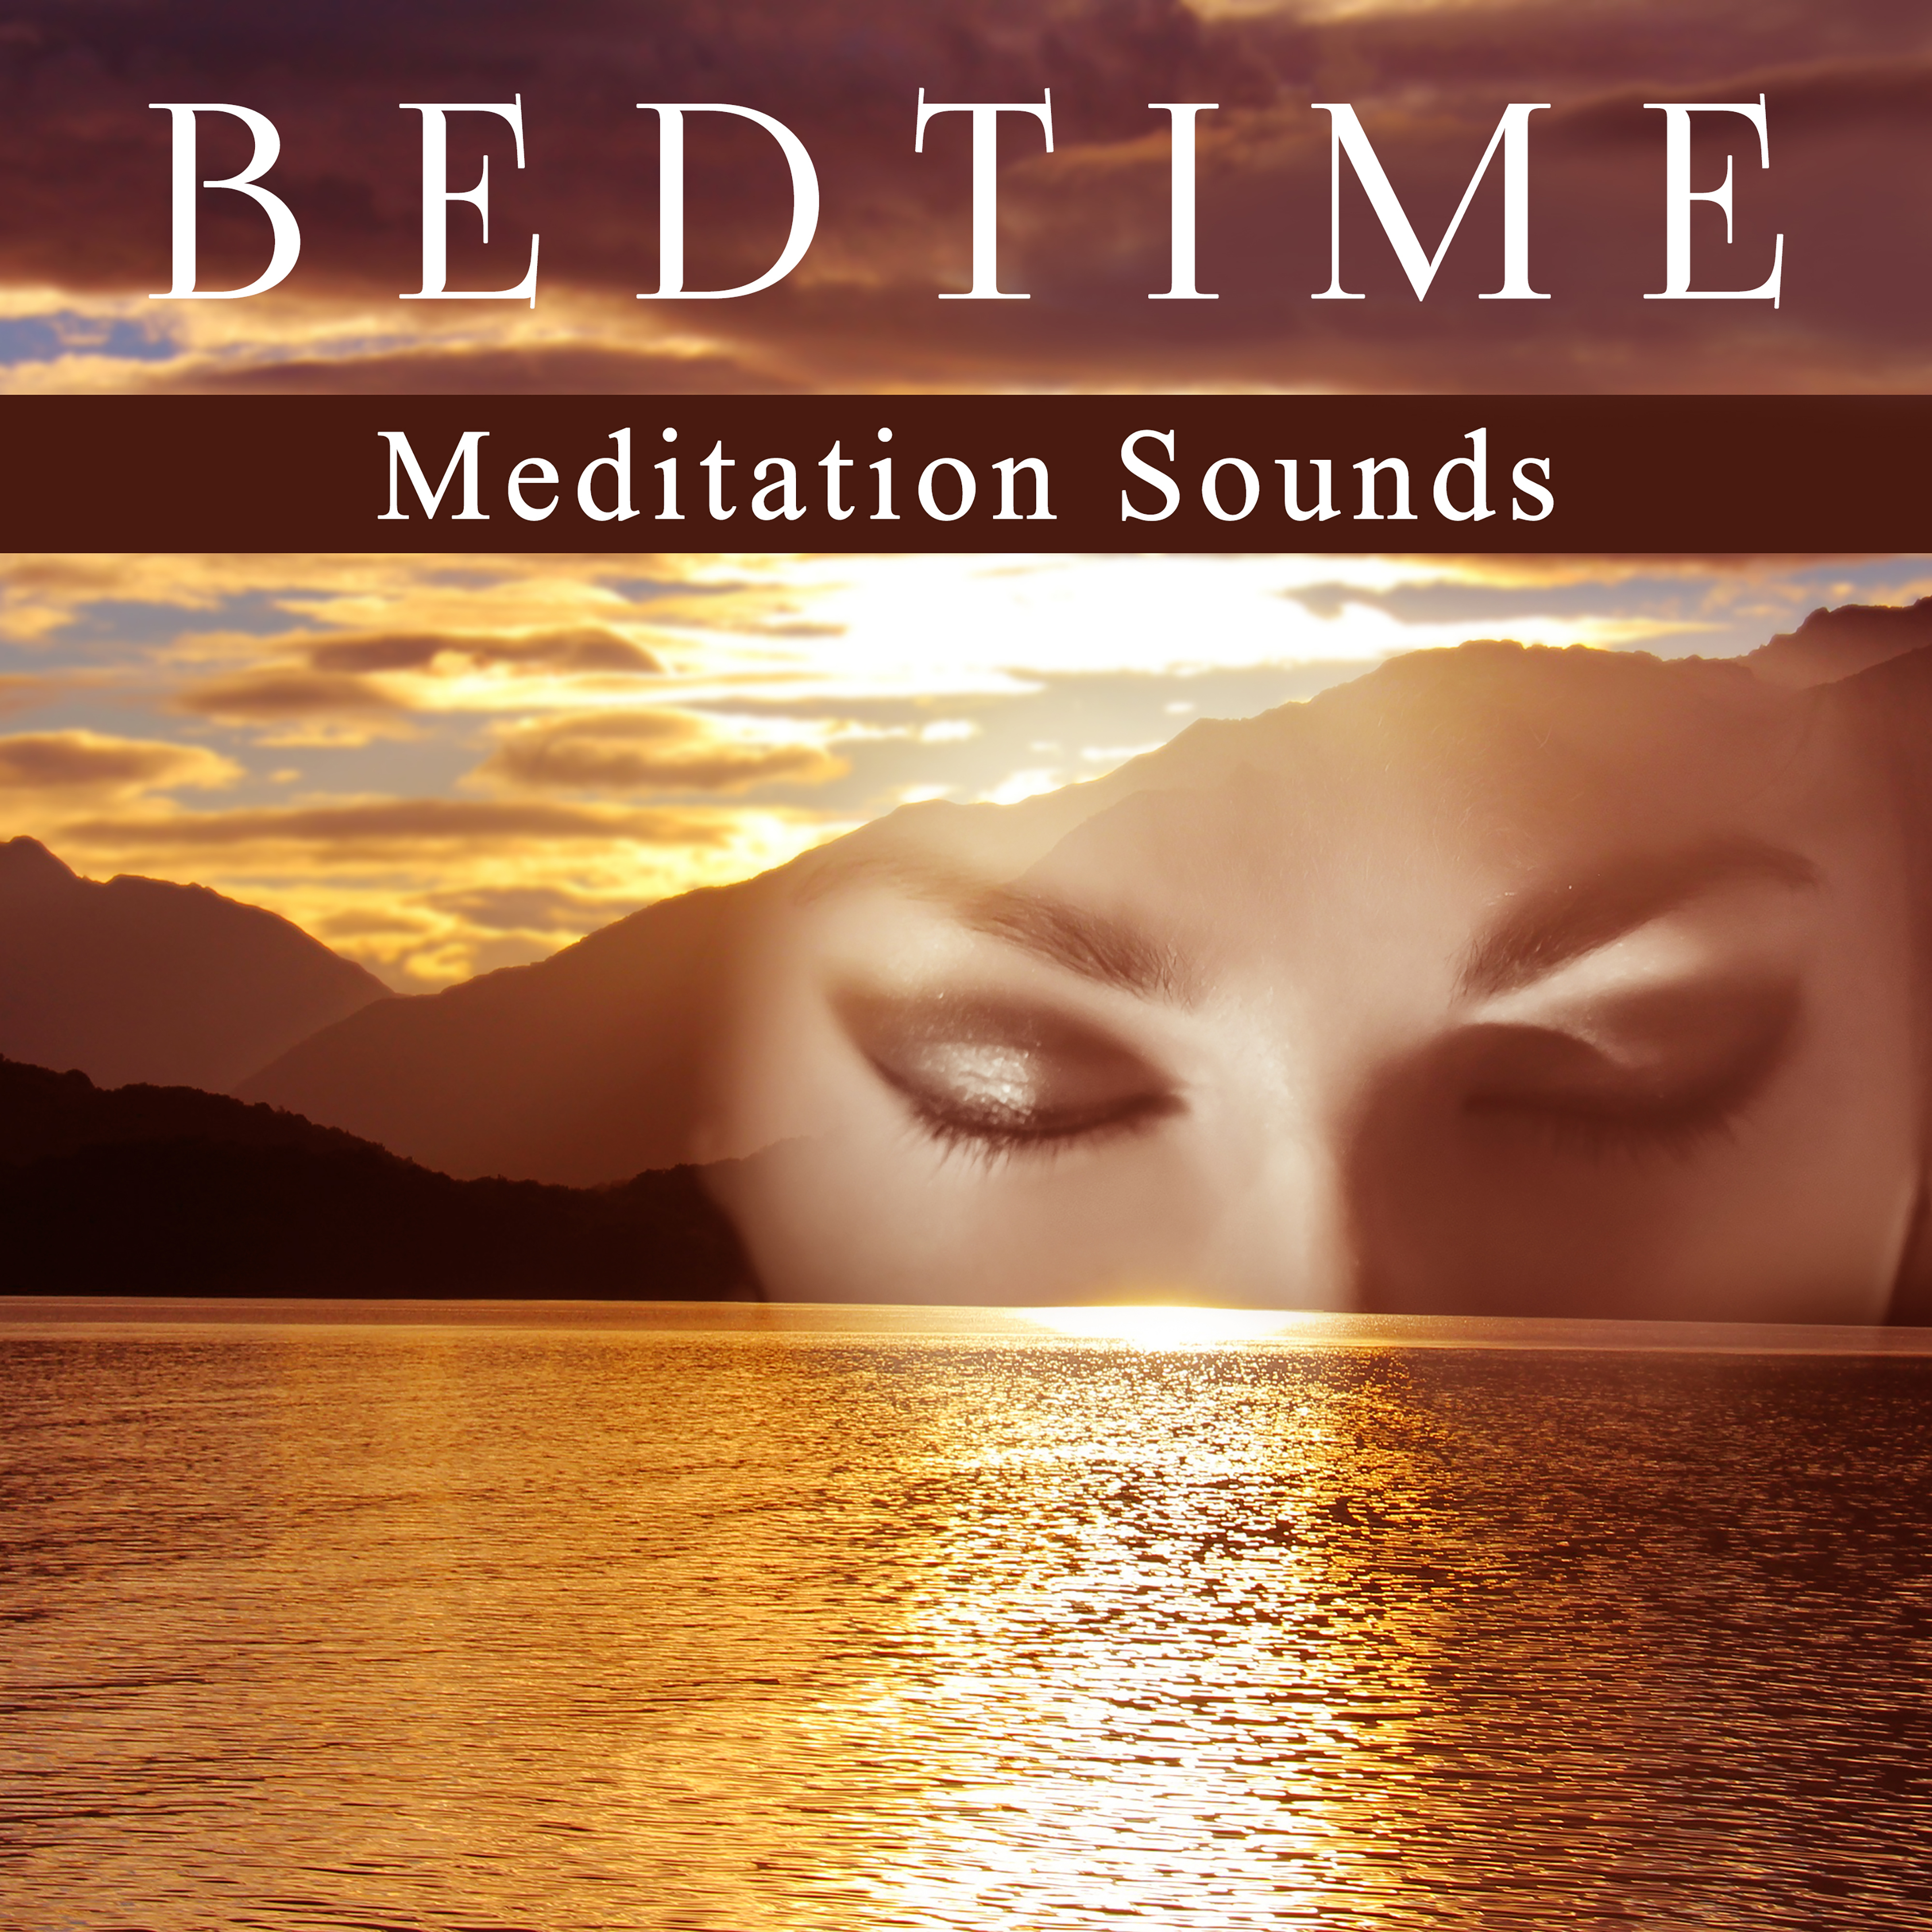 Bedtime Meditation Sounds – Yoga Practice, Calm Down Emotions, Rest & Sleep Well